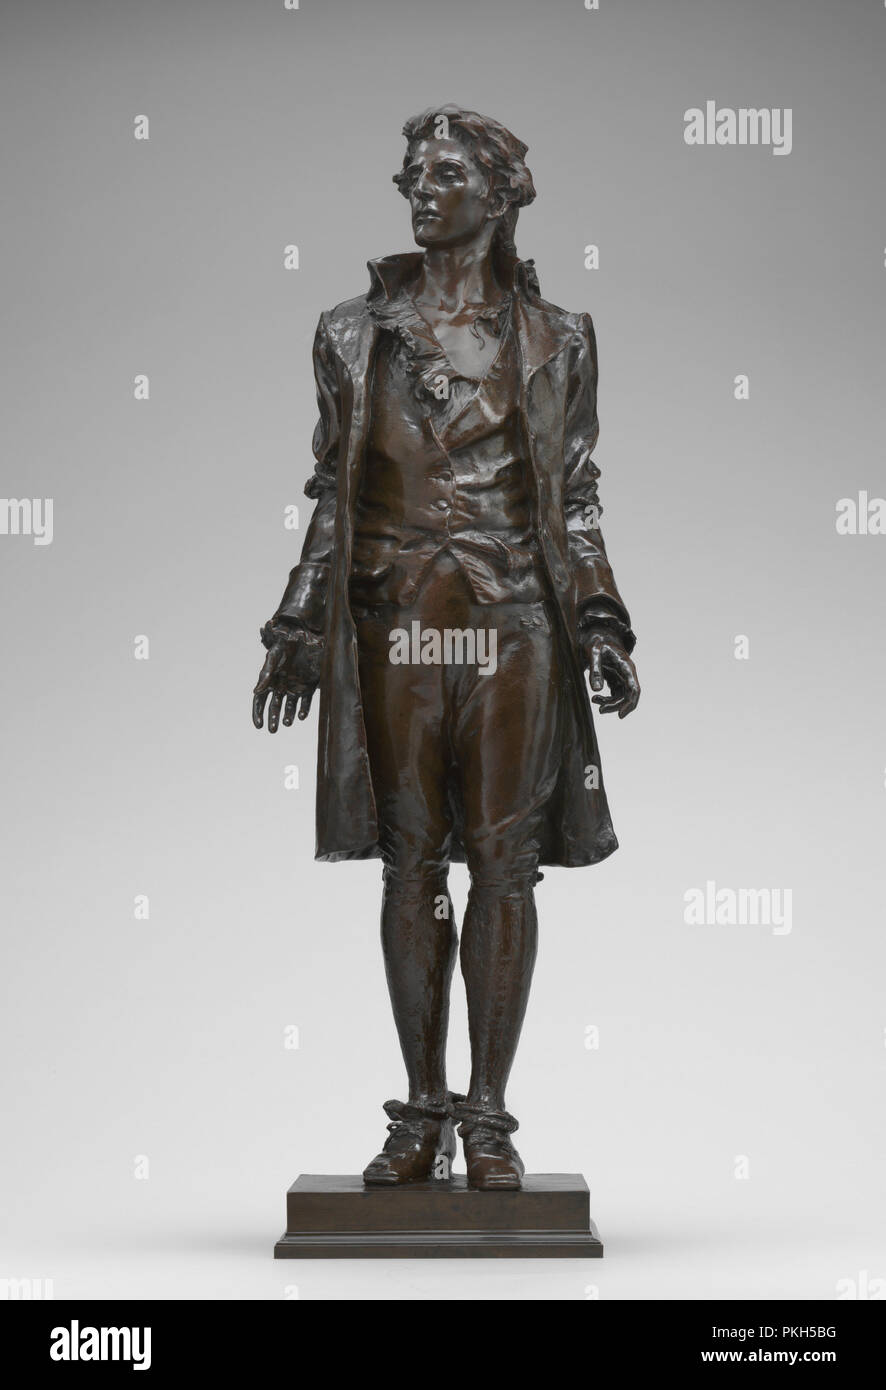 Nathan Hale. Dated: model 1889/1890, cast 1890. Dimensions: height: 71.1 cm (28 in.). Medium: bronze. Museum: National Gallery of Art, Washington DC. Author: Frederick William MacMonnies. Stock Photo